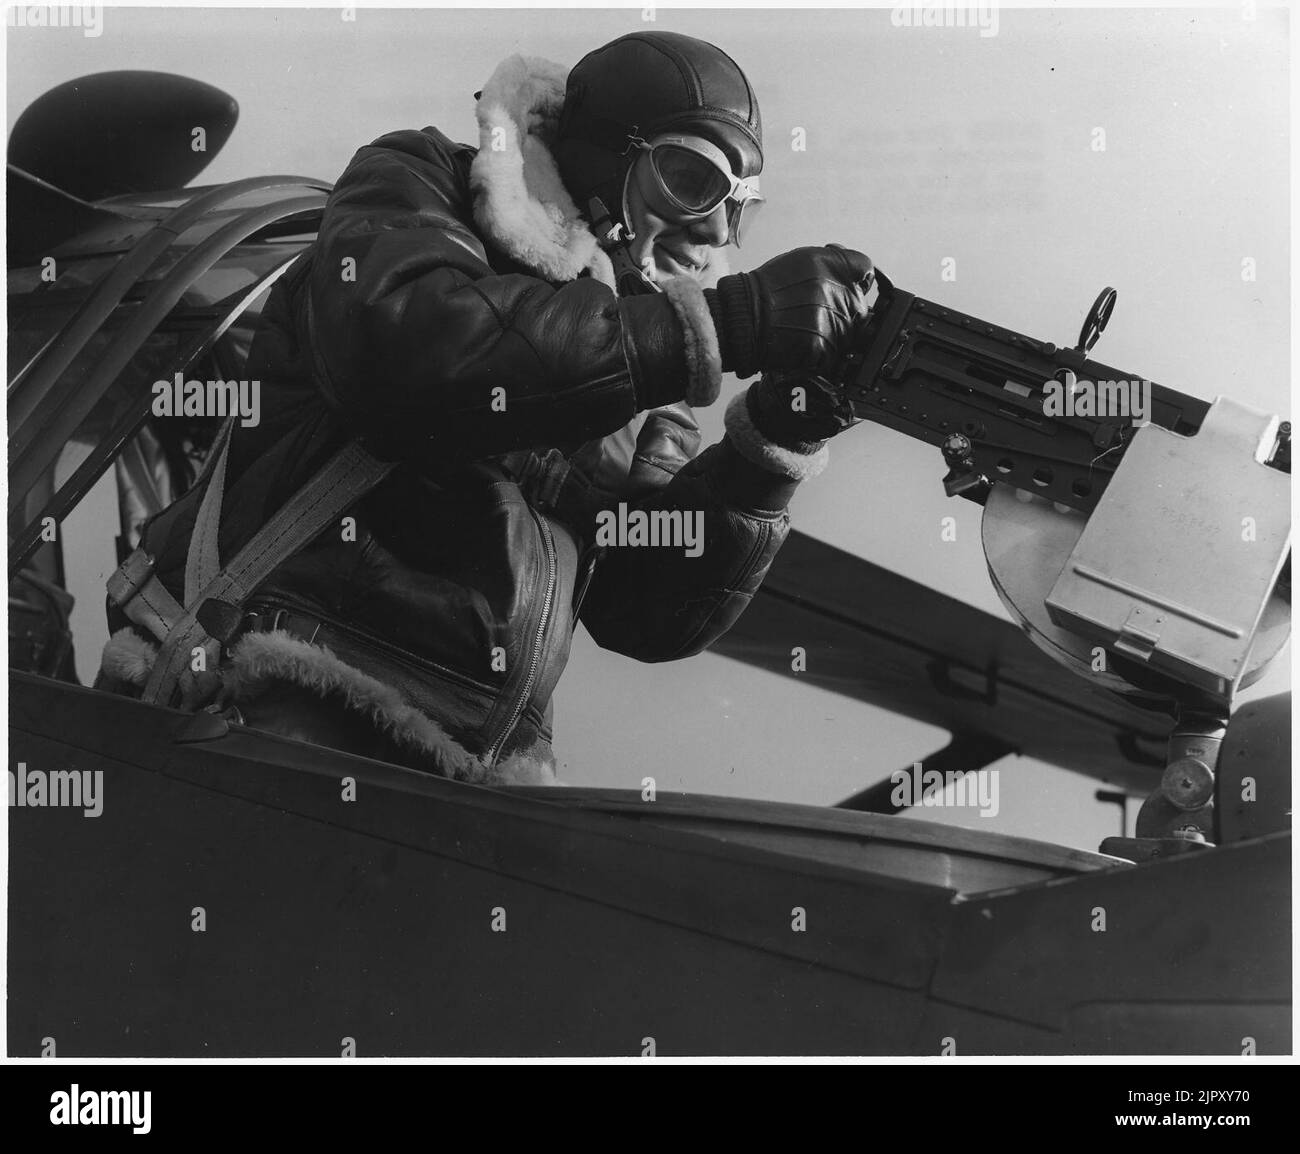 This crack aerial machine gunner is part of an unbeatable combination. He has a fast, accurate gun-and the world's... Stock Photo